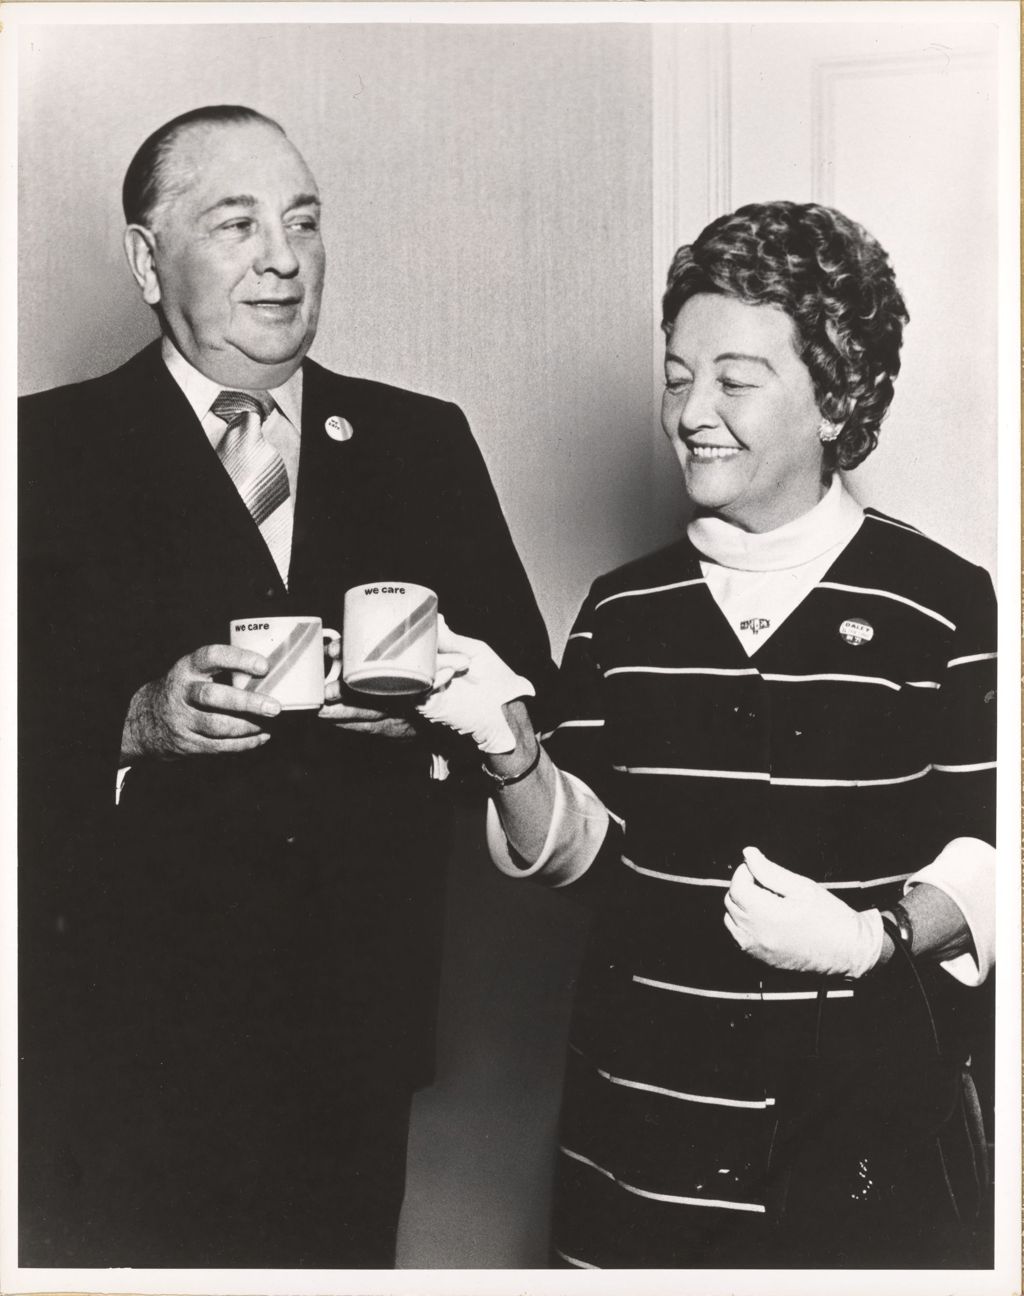 Richard J. Daley and Eleanor Daley with "We Care" mugs